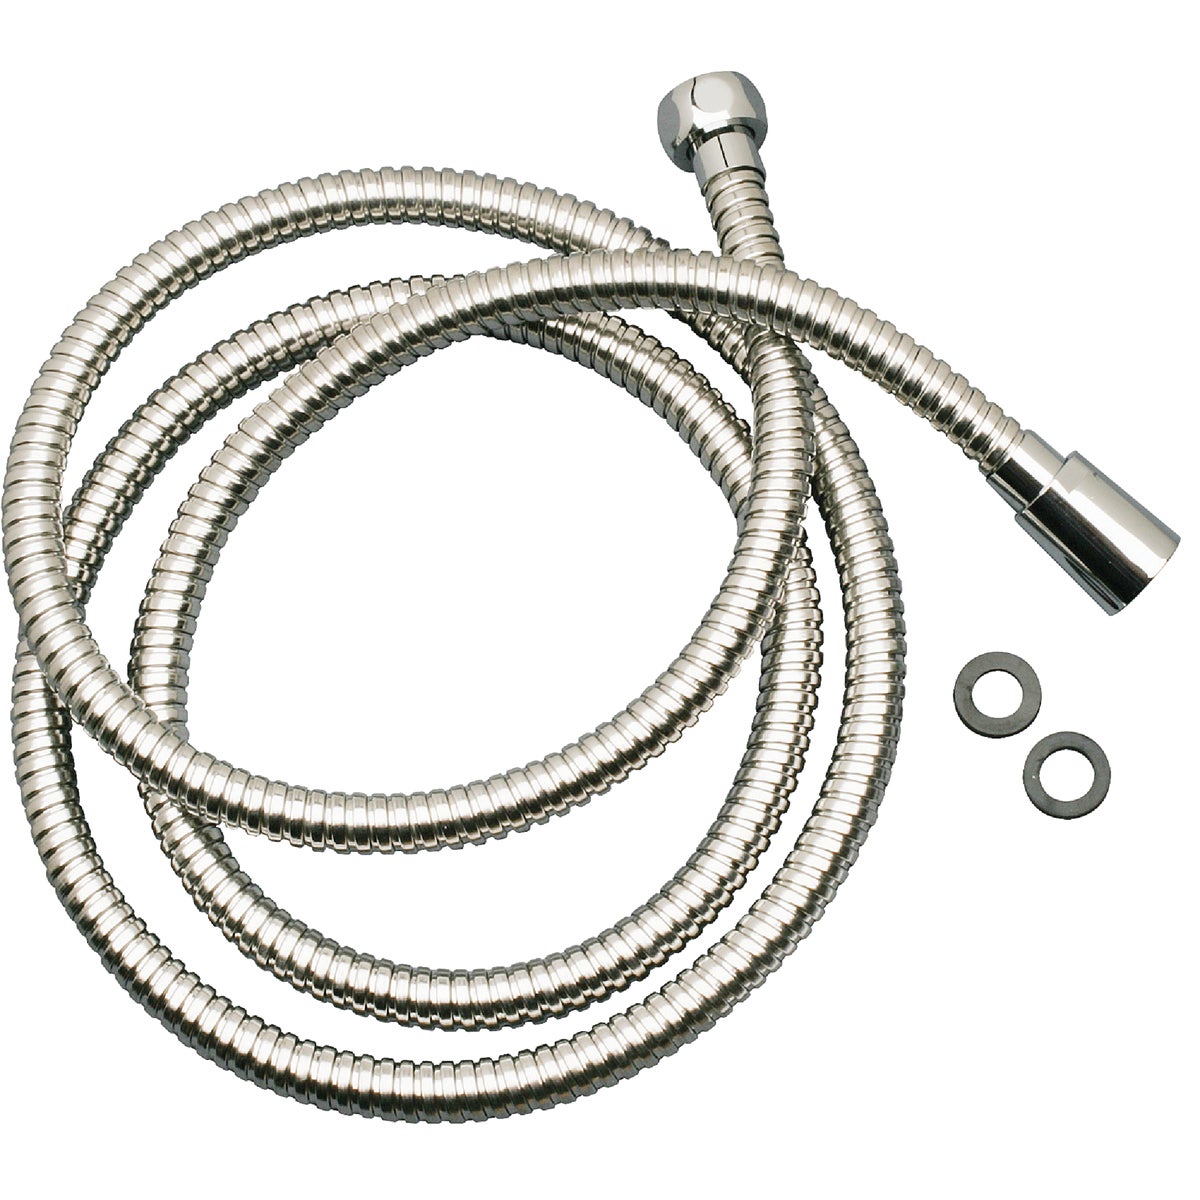 Do it Stainless Steel 60 In. Stainless Steel Shower Hose